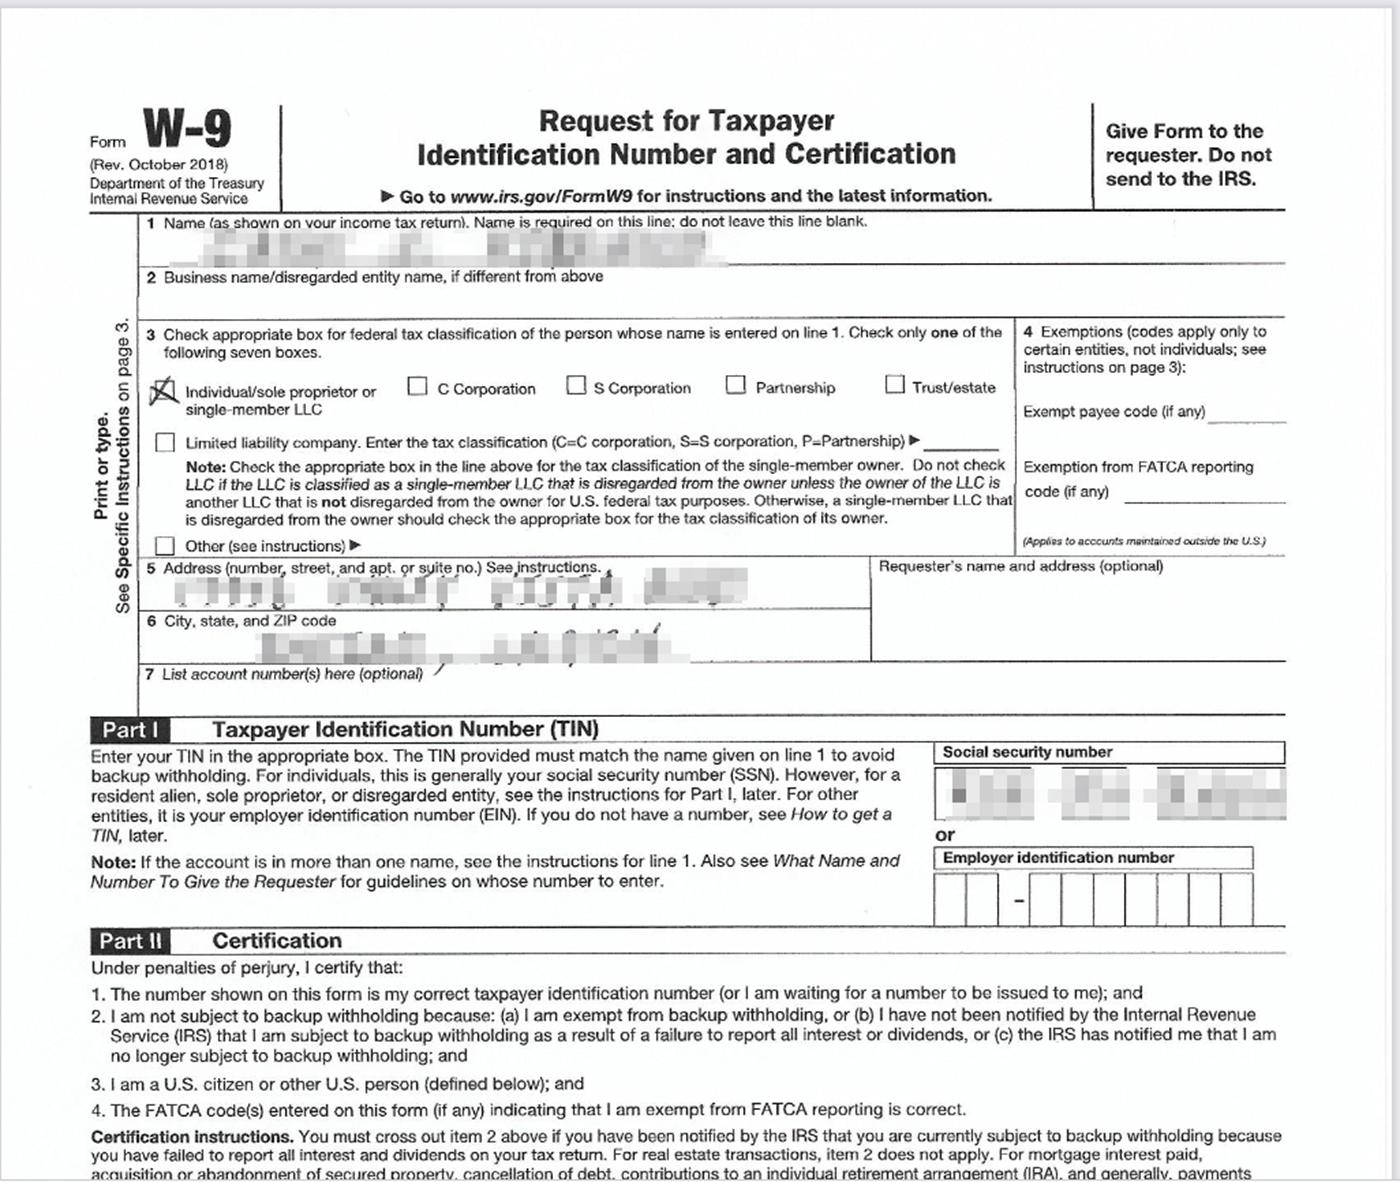 A redacted tax form that was leaked online